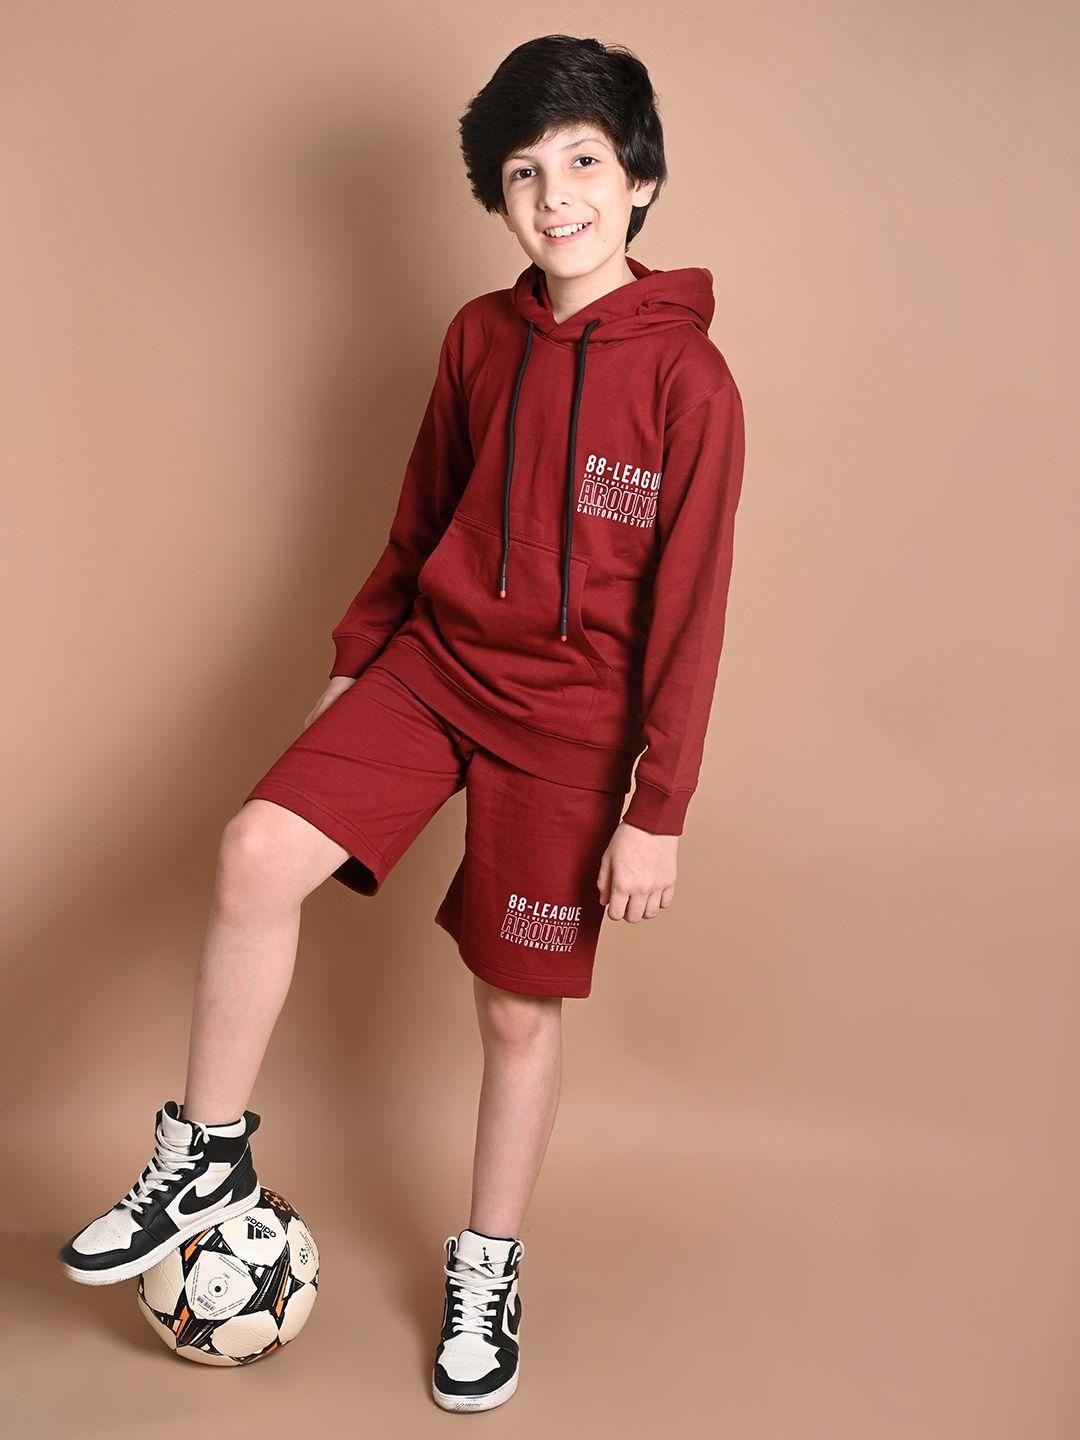 lilpicks-boys-maroon-&-white-t-shirt-with-short